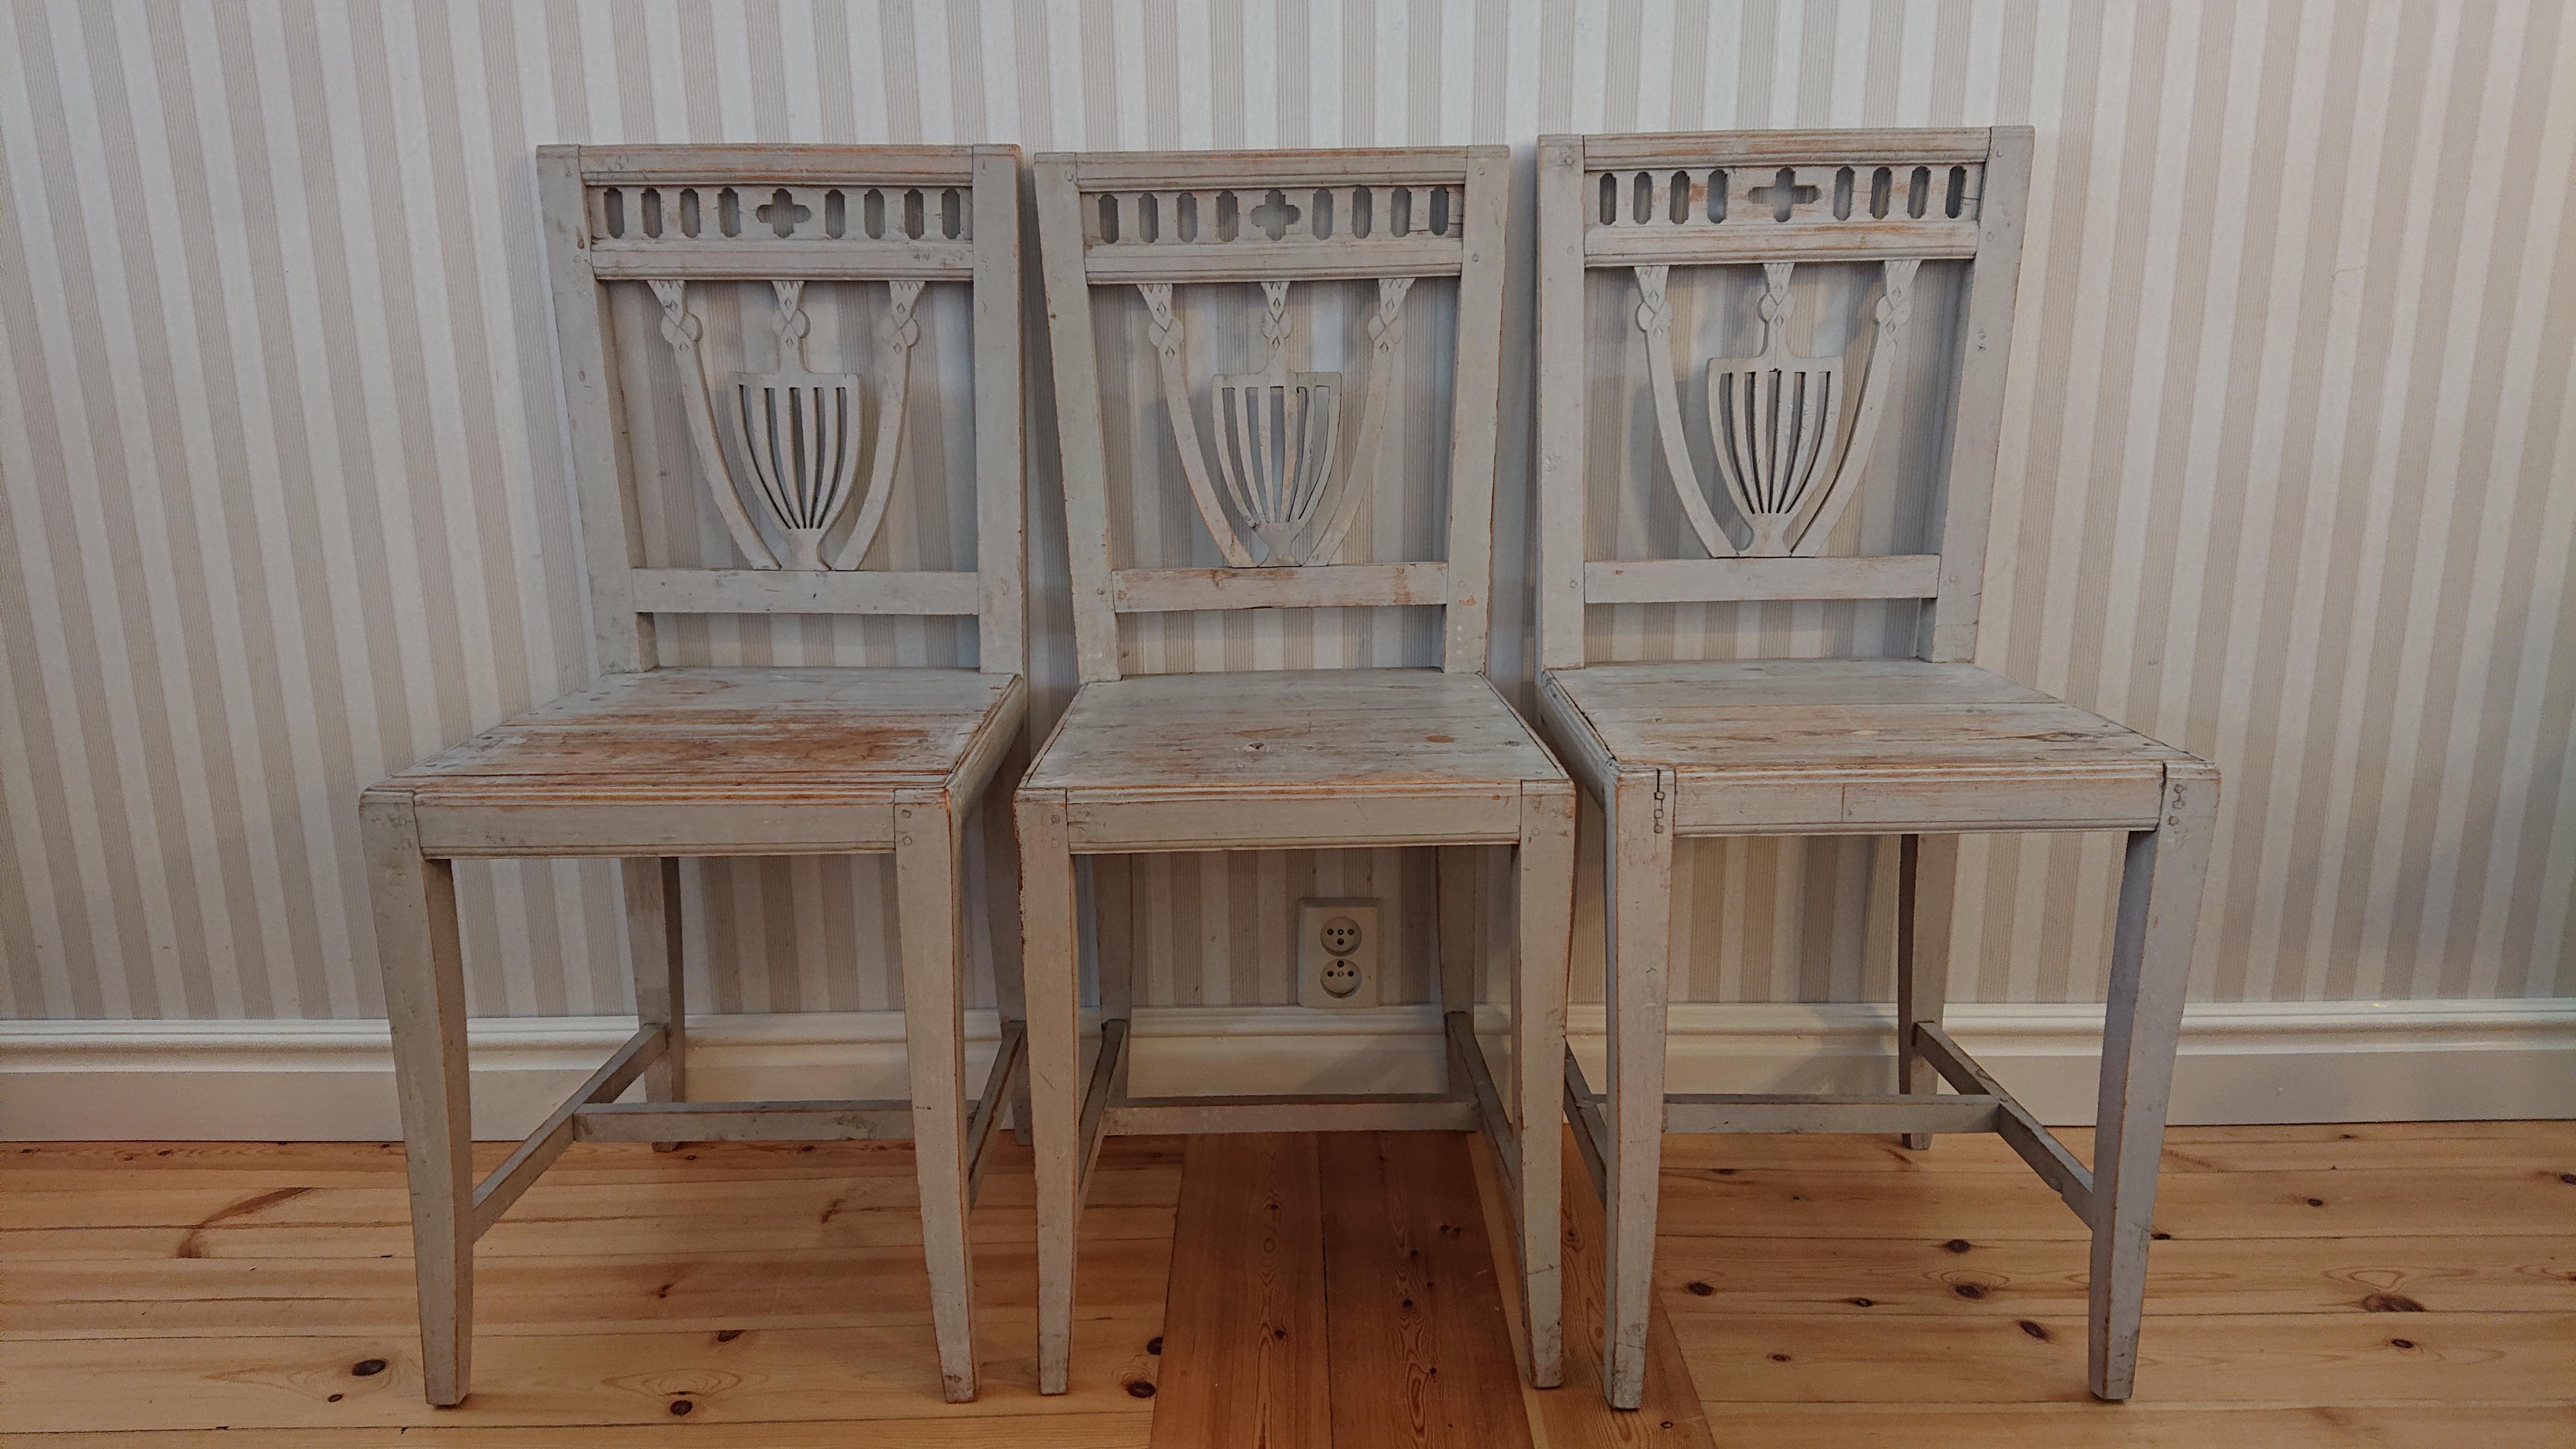 19th Century three Swedish Gustavian chairs with untouched originalpaint from Boden Norrbotten,Northern Sweden.
Pleasent charming model with unusually fine hand carved urn in the back and nice patina.
Made in painted pine.